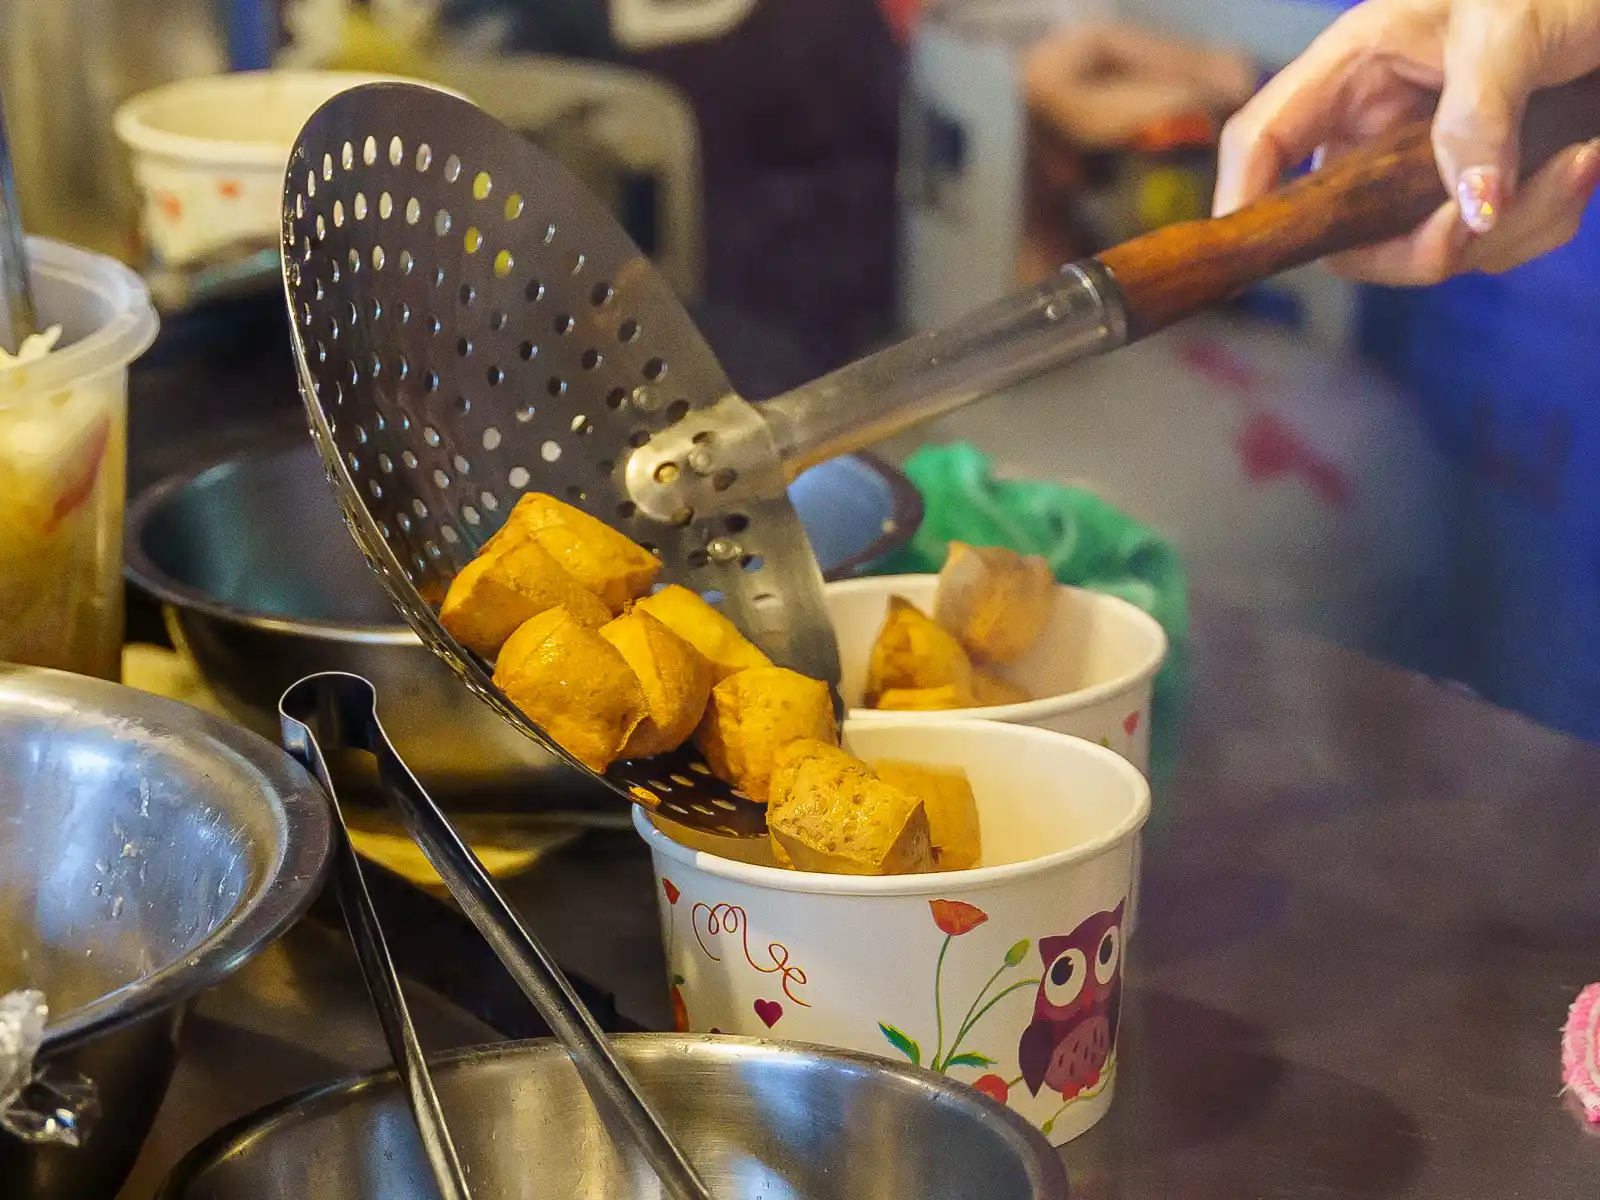 An order of stinky tofu is being packed into a take-out container.